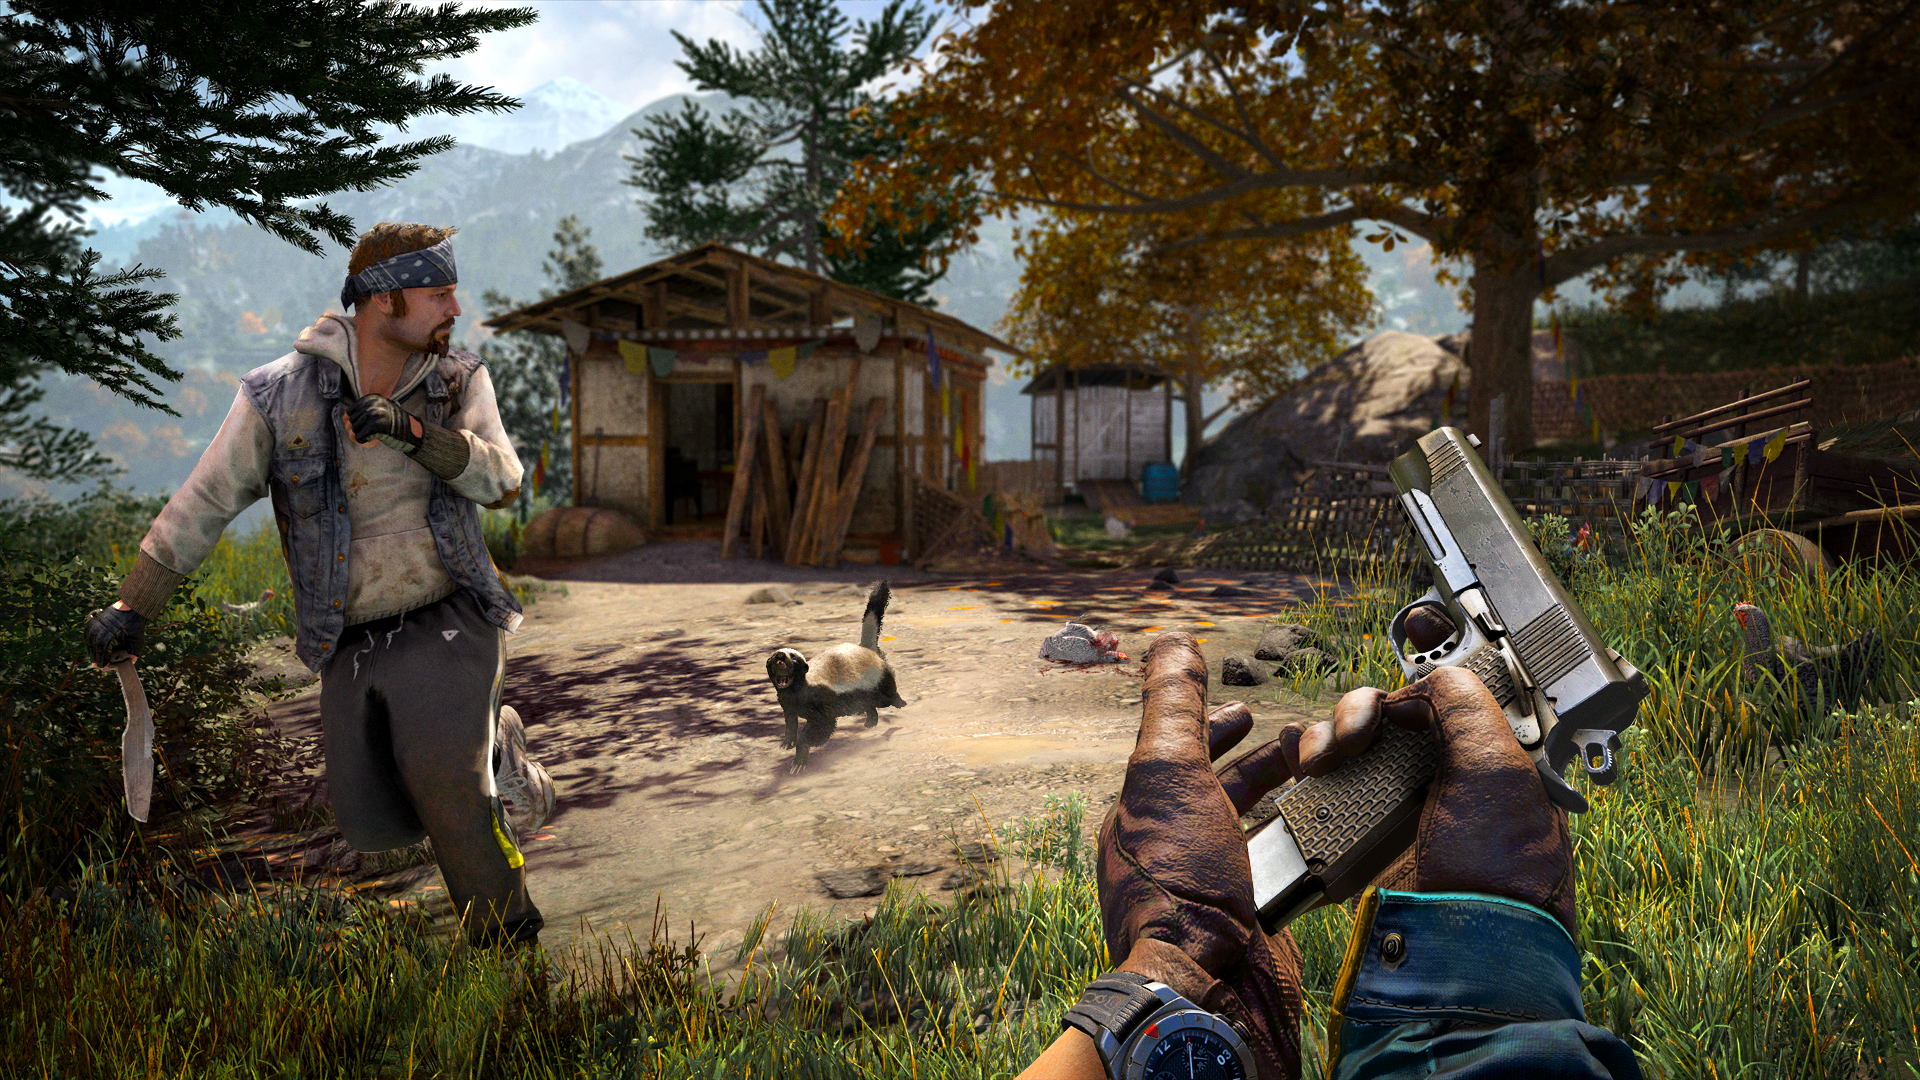 Download free farcry osx rapidshare files